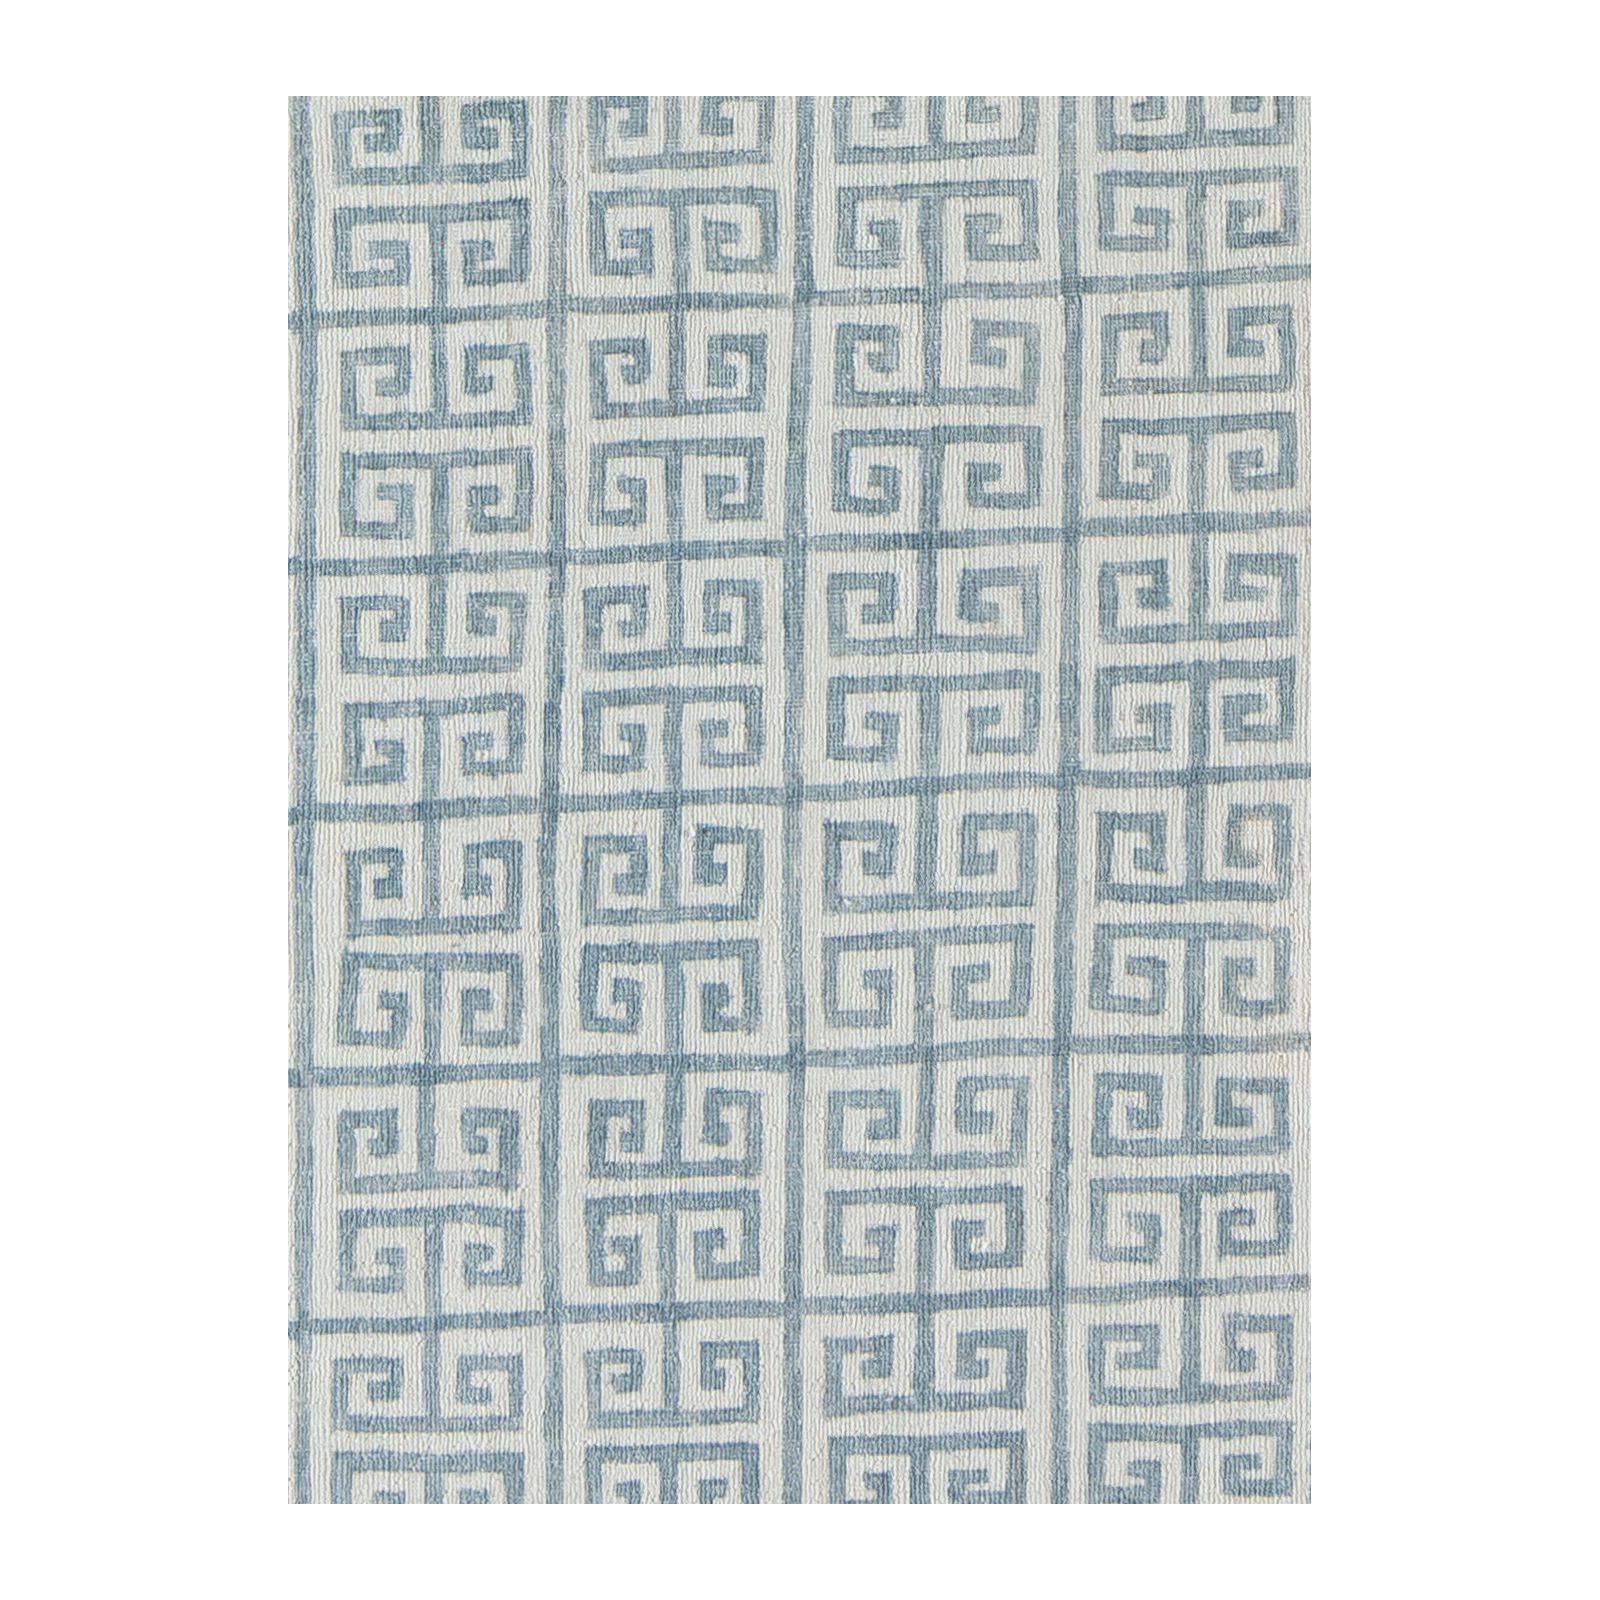 Our Greek Key rug is hand-knotted, and made from the finest hand-carded, hand-spun naturally dyed wool with silk accent.